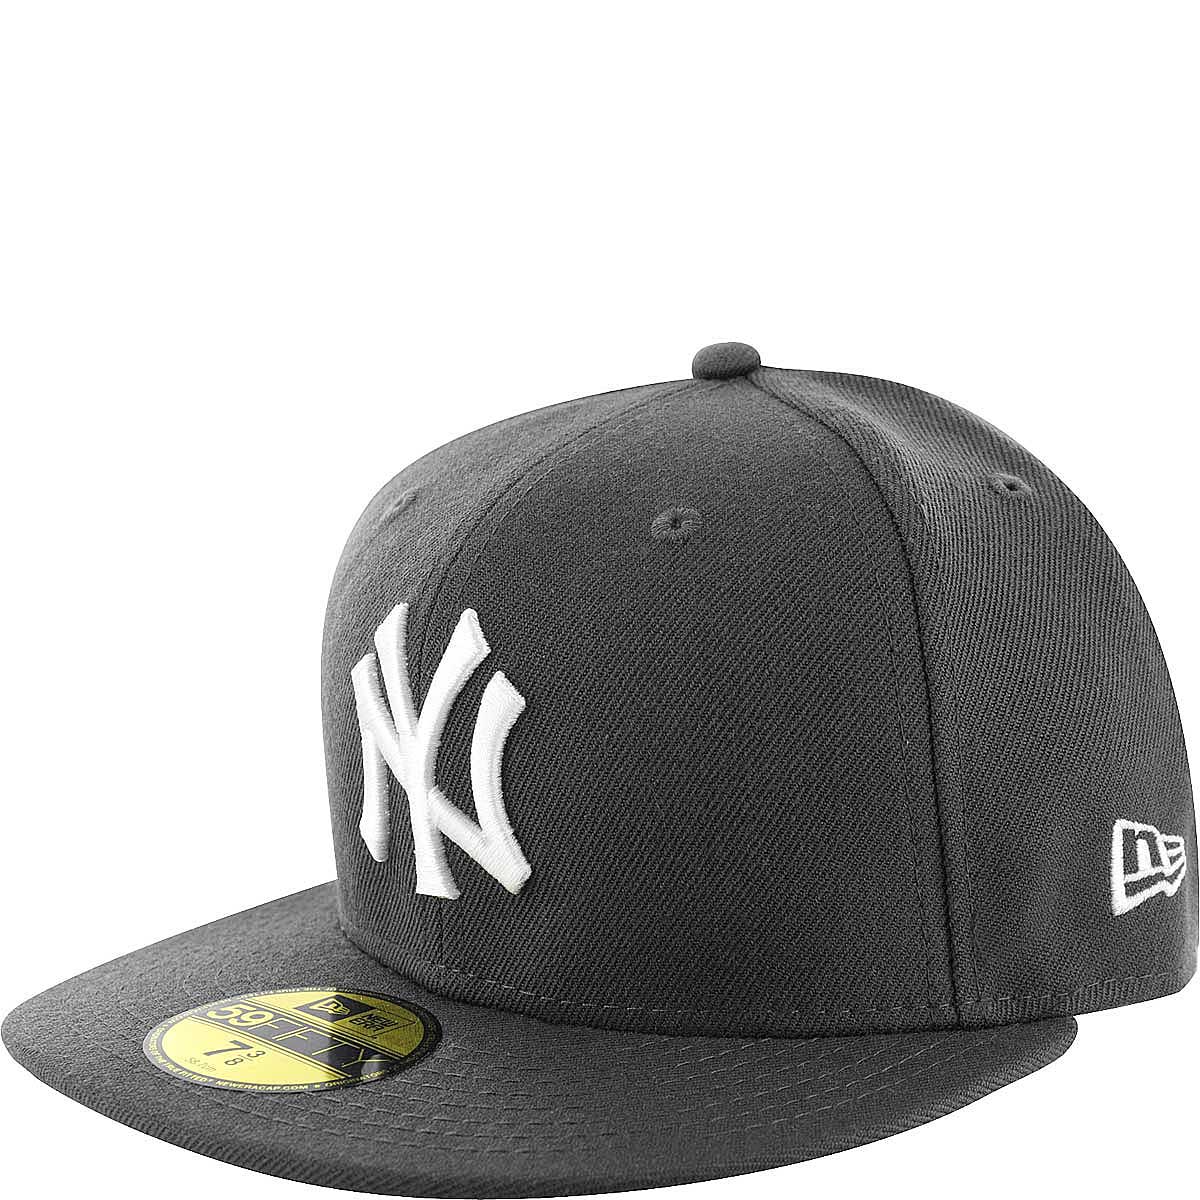 🏀 Get the New Era NY Yankees MLB 59FIFTY Fitted Cap in grey